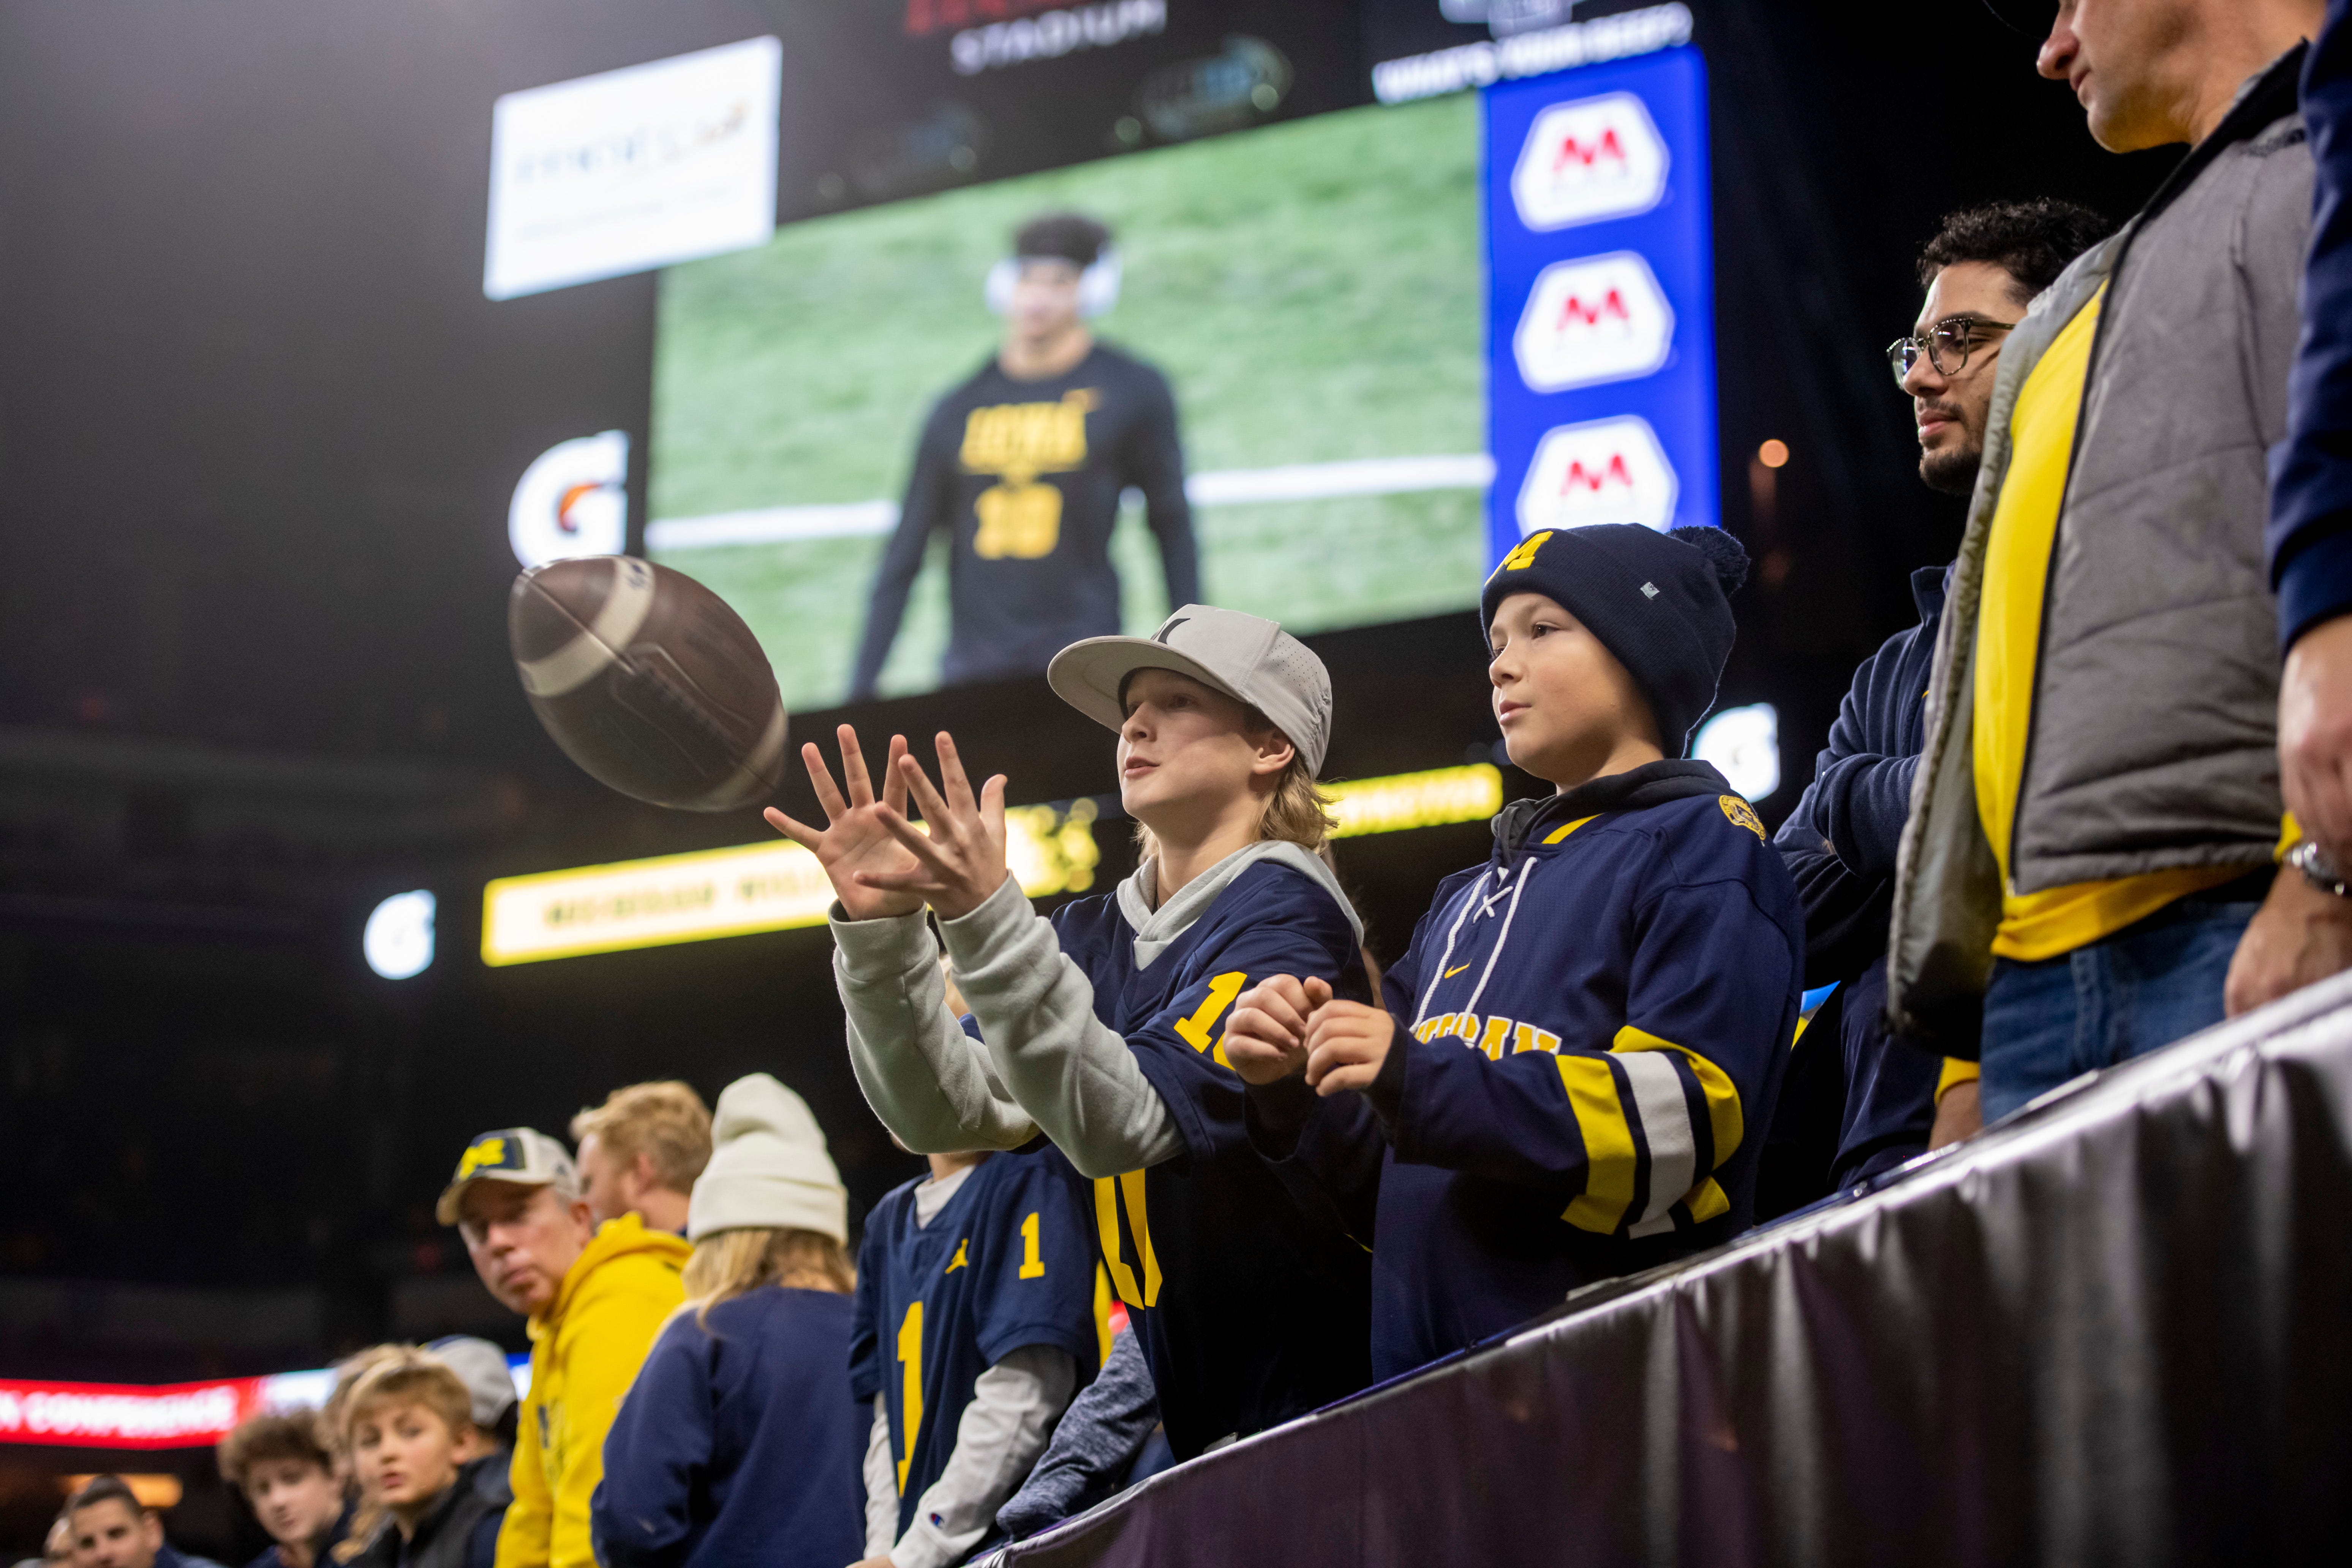 A young fan catches a pass before the start of the Big Ten championship game at Lucas Oil Stadium.